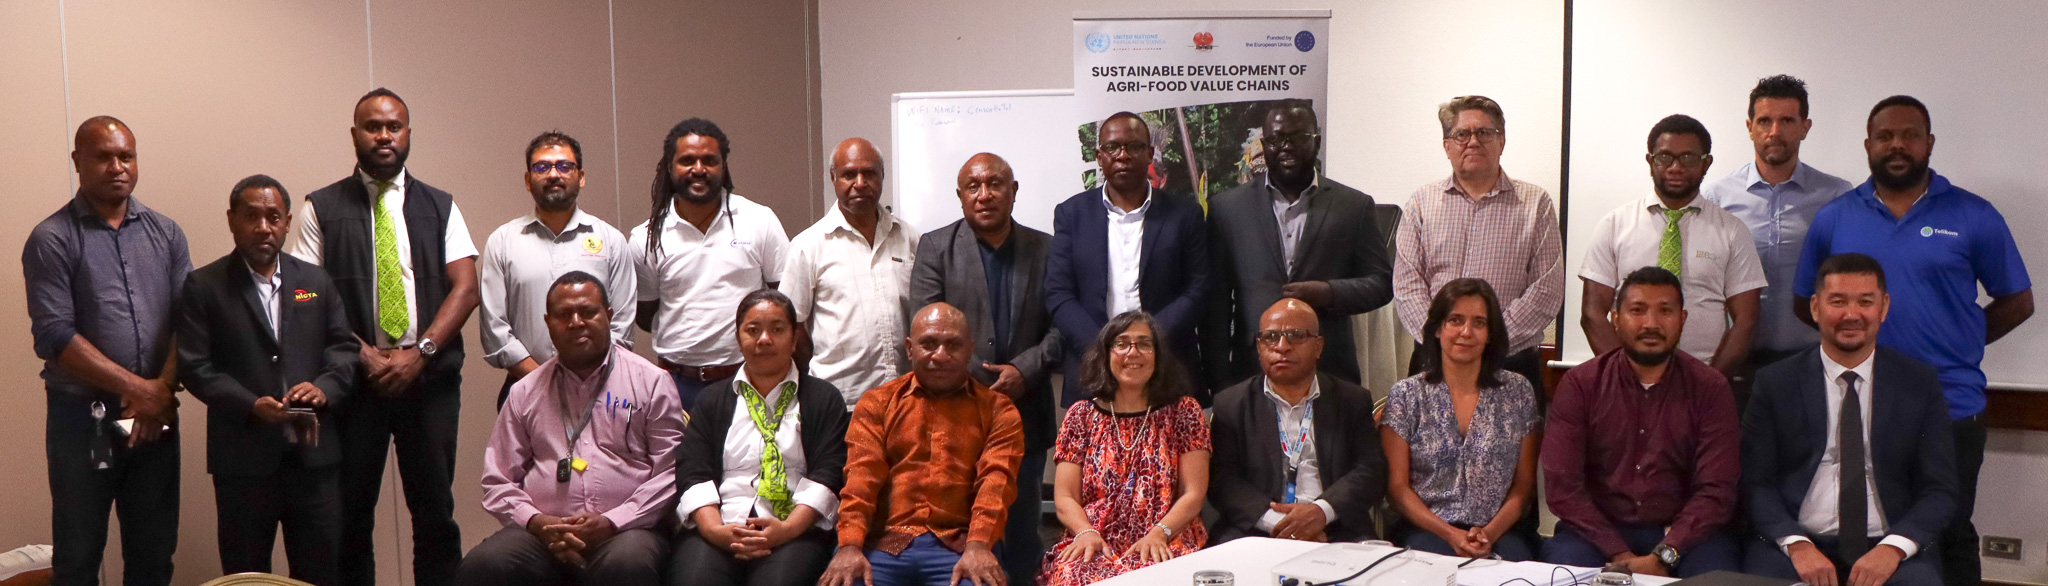 Participant officials and representatives in the Policy Dialogue session, held by the EU-STREIT PNG Programme, posing for a group photo.